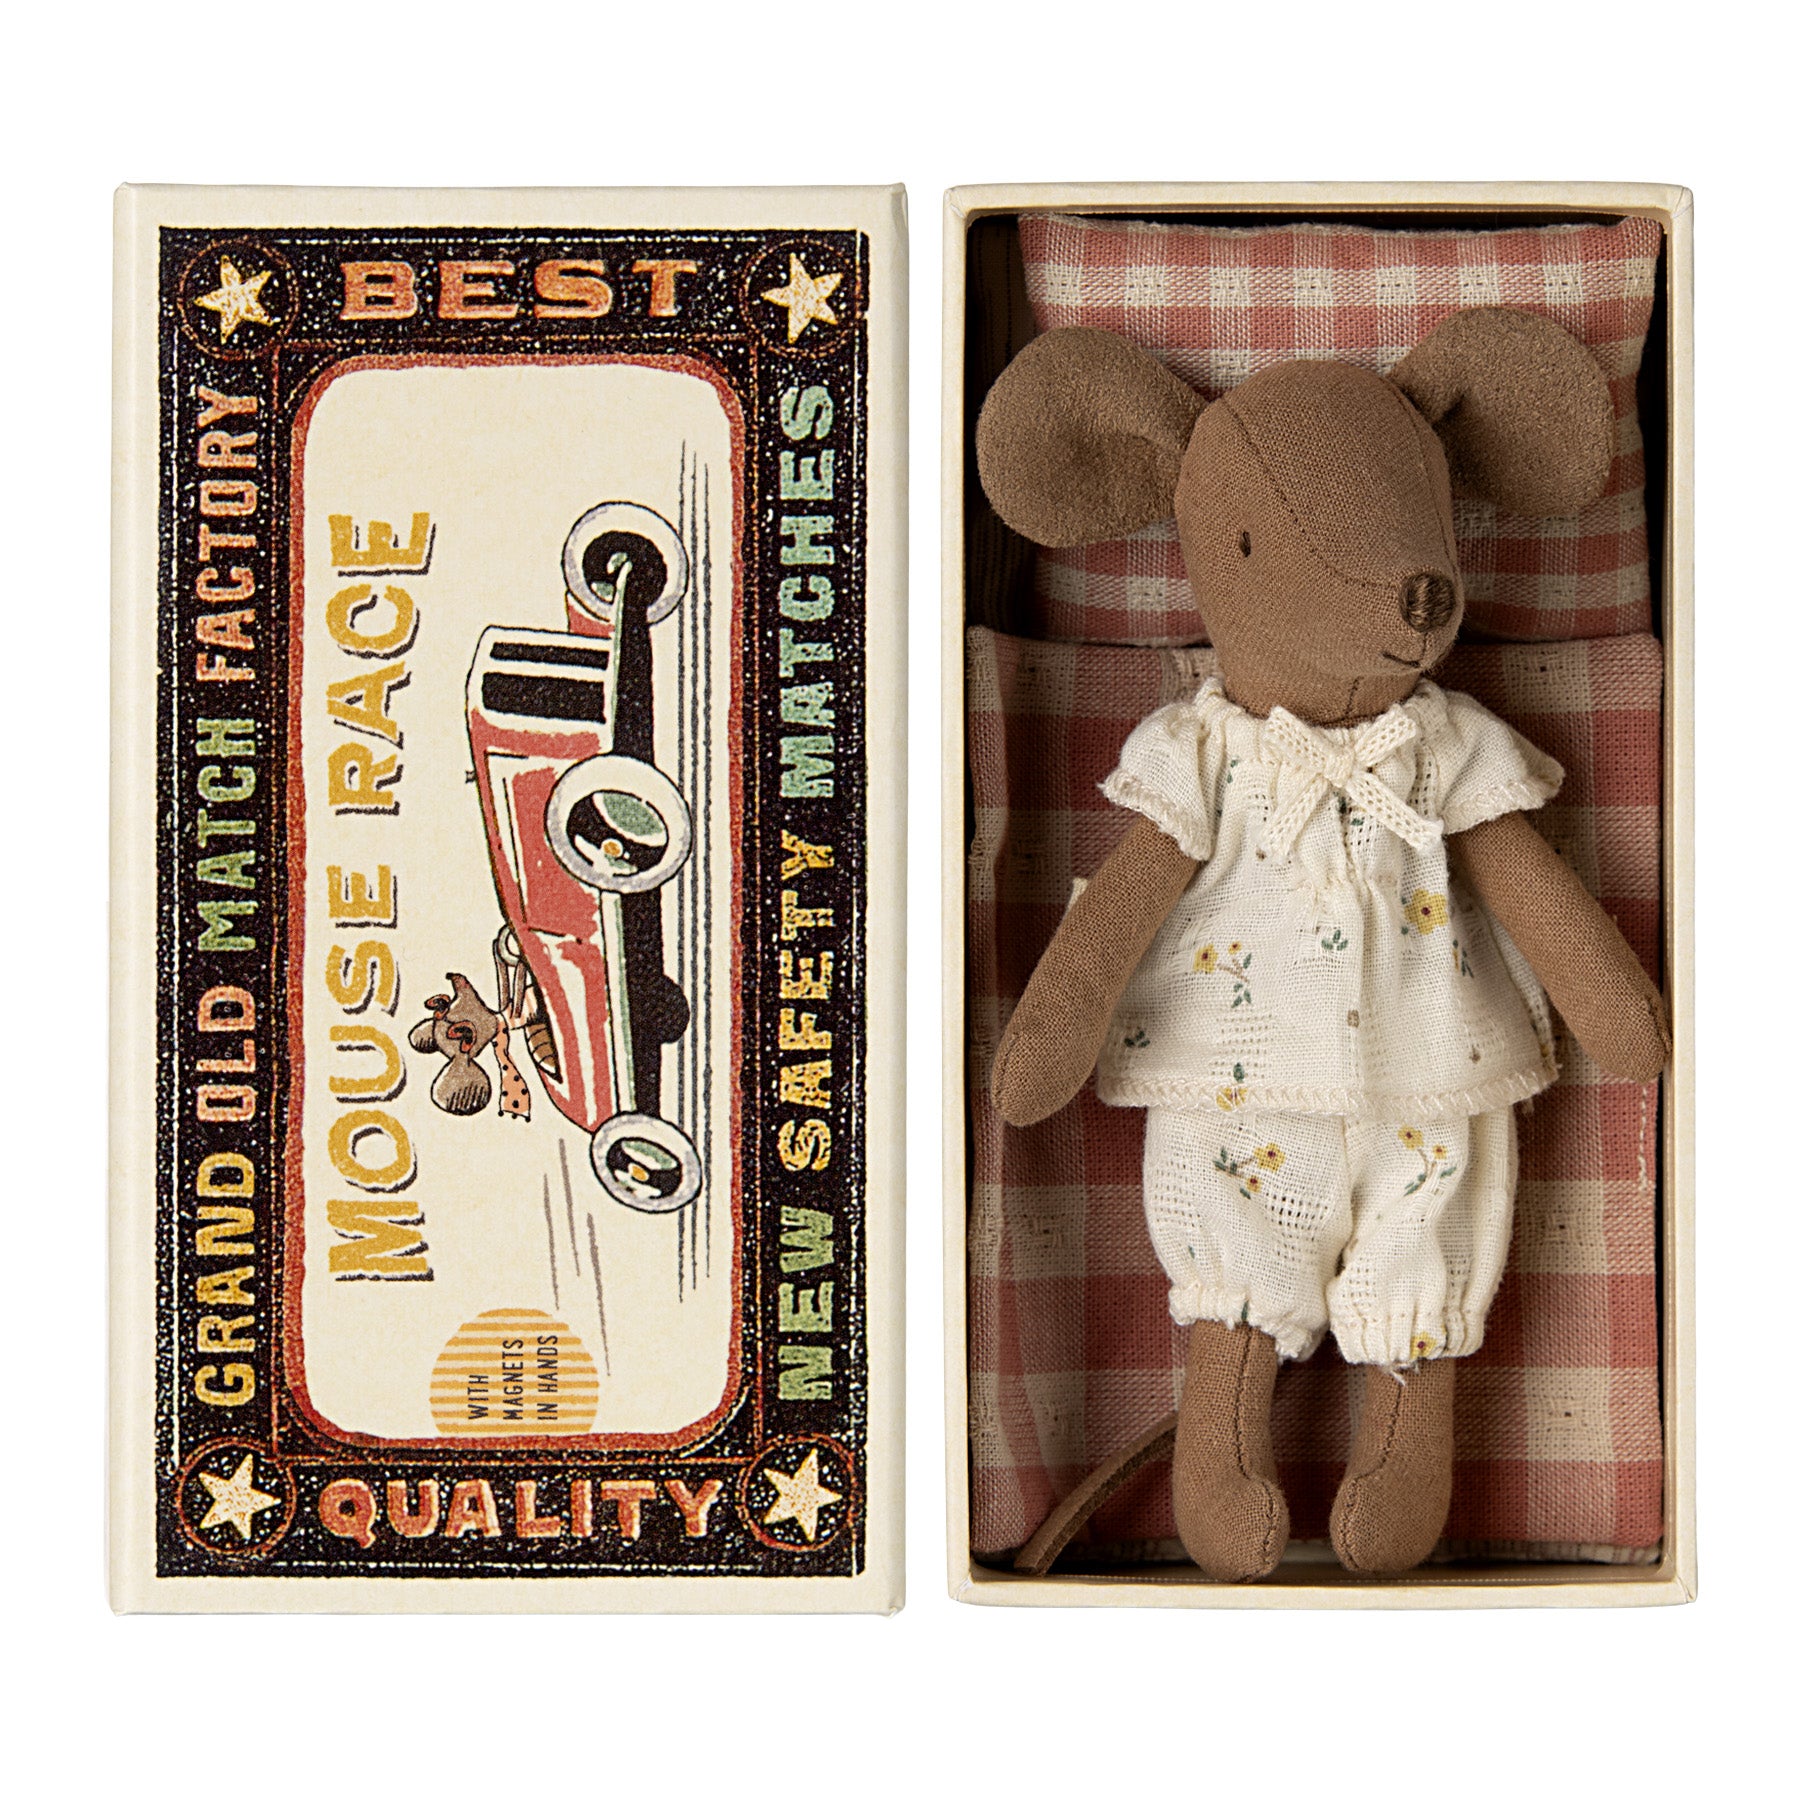 maileg brown linen mouse in white pjs with yellow flowers laying in her matchbox bed with red check blankets